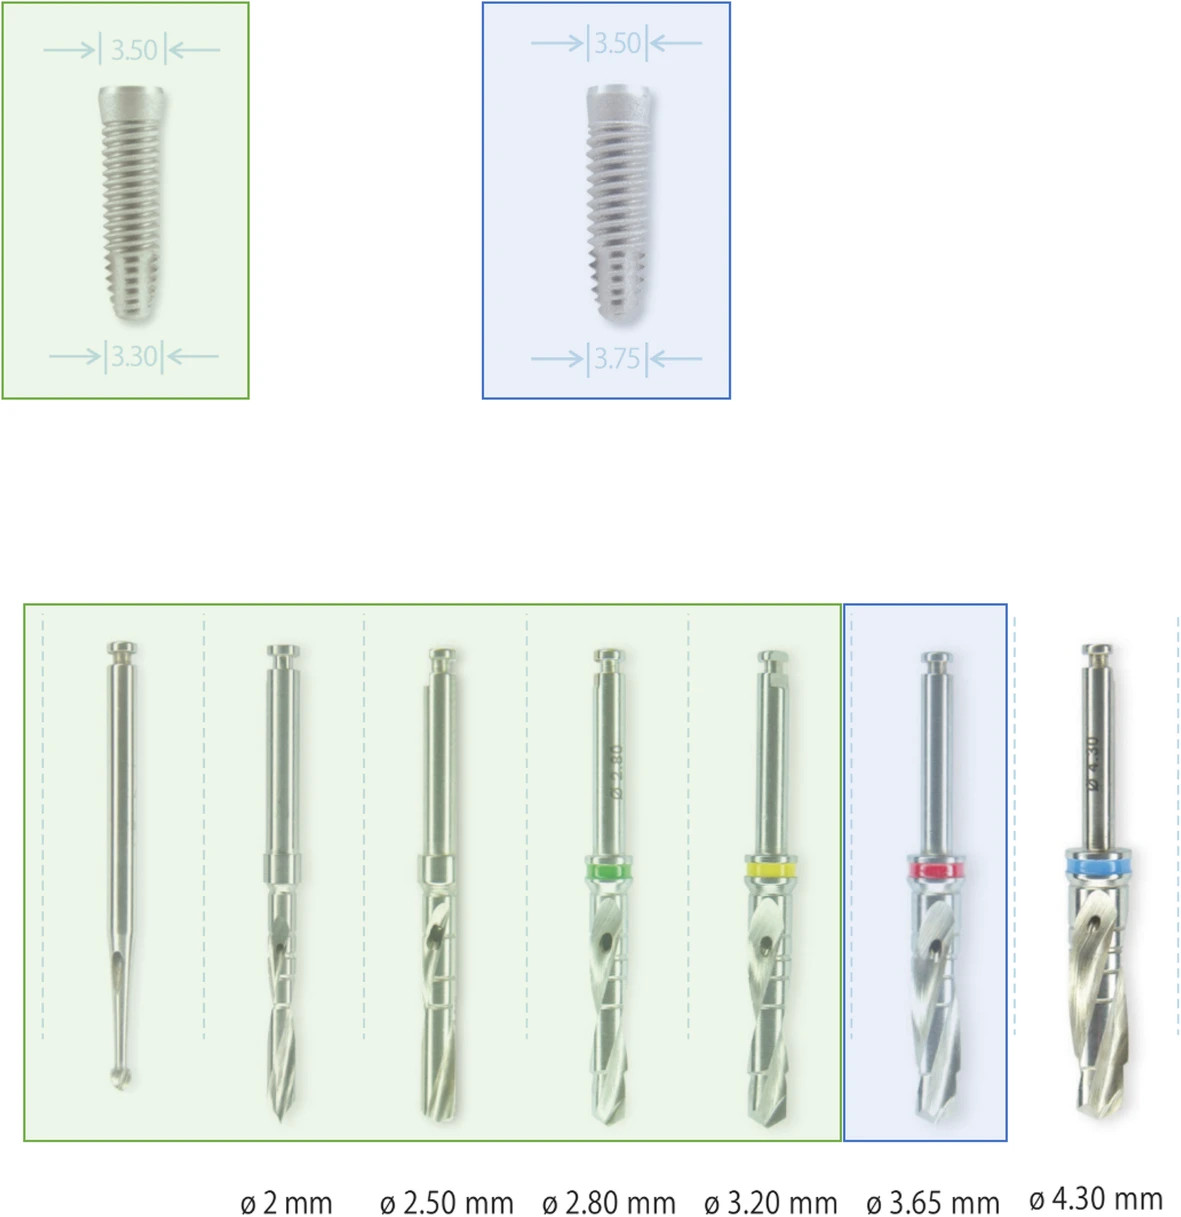 Figure 2. Over-dimensioned protocol. The over-dimensioned protocol was conducted by a final drill of 1 mm narrower than the implant diameter. The final drill for implants of 3.3. mm was 3.2 mm and of implants measuring 3.75 mm, it was 3.65 mm. Within this study, an over-dimensioned protocol was defined as a final drill larger than recommended by the company, which is in this case 4 or 4.5 mm wider than used in the standard protocol. Permissions for reproducing the figures were received from HI-TEC IMPLANTS LTD. Source: Product Catalogue 12th Edition